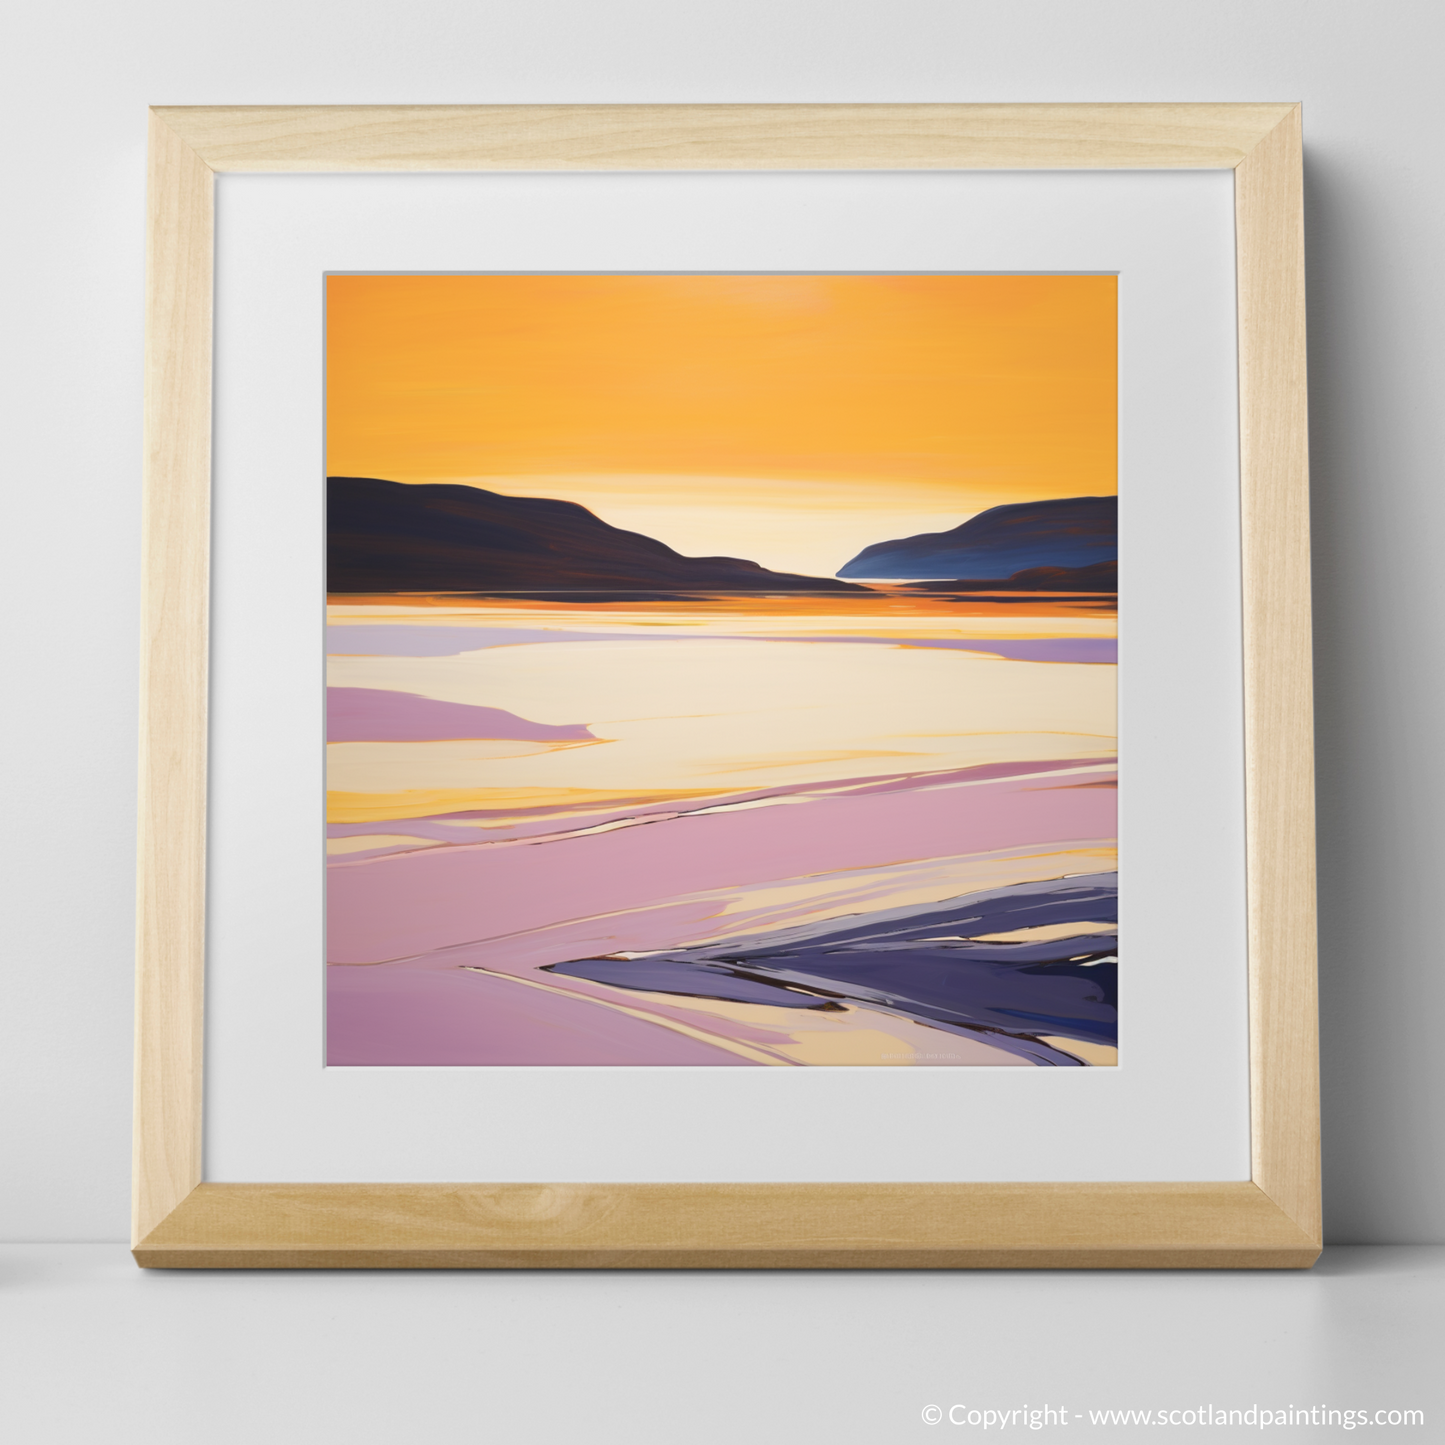 Golden Serenity of Balnakeil Bay: A Color Field Masterpiece